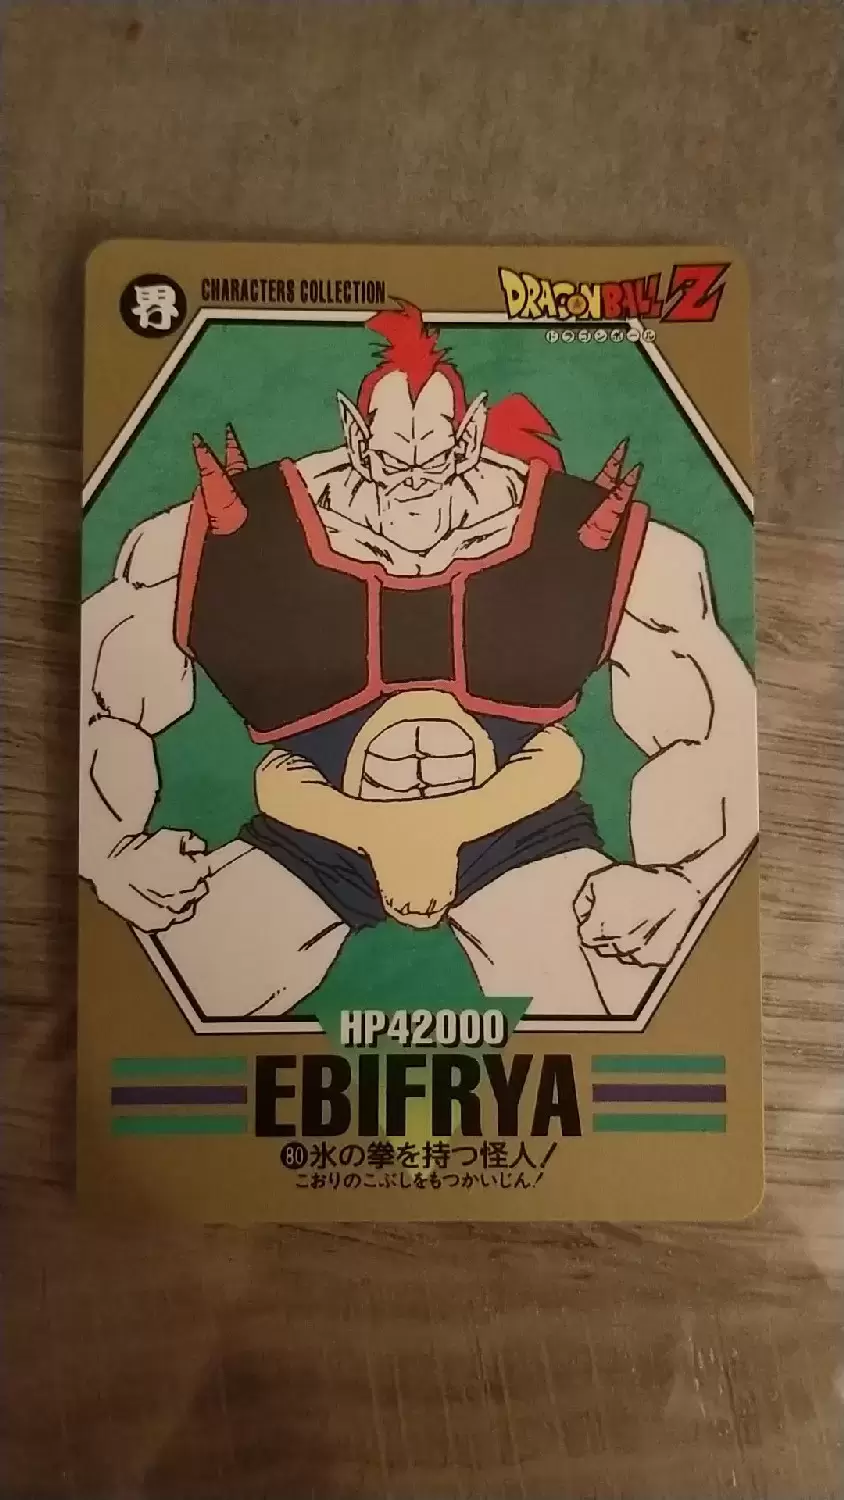 Dragon ball Characters Collection Part 2 - Card n°80